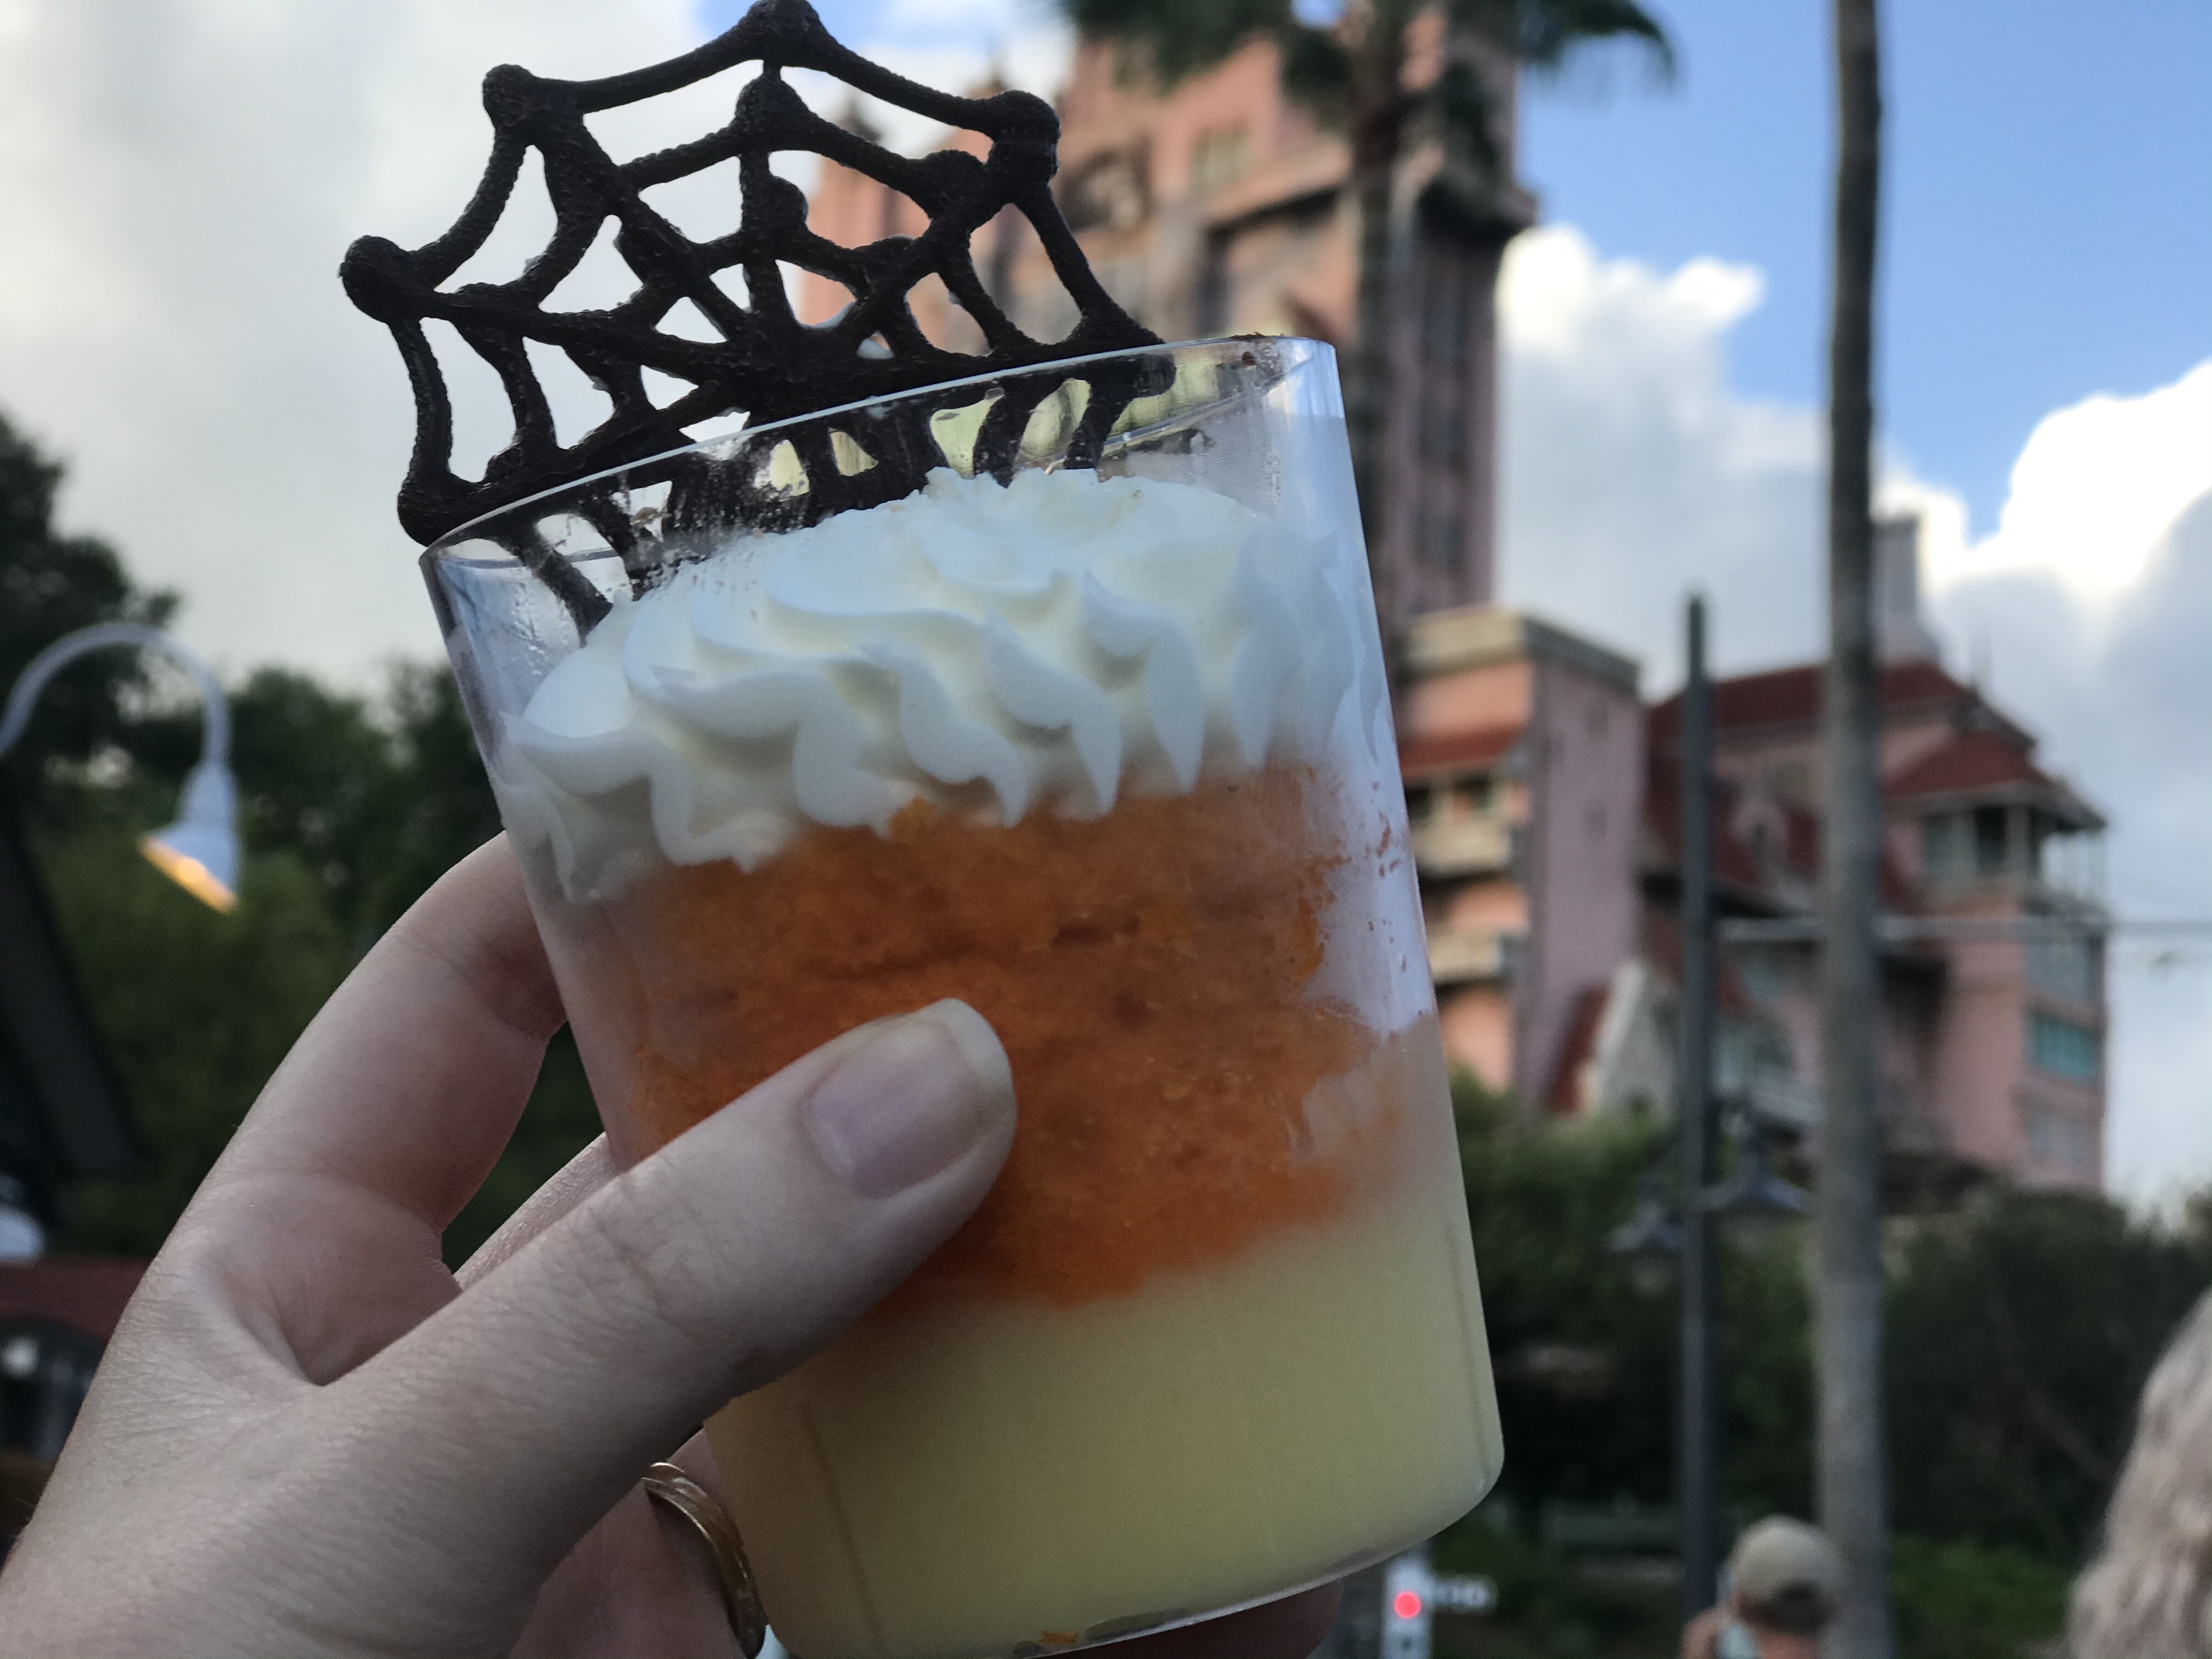 The New Candy Corn Verrine At Hollywood Studios is a Trick And A Treat